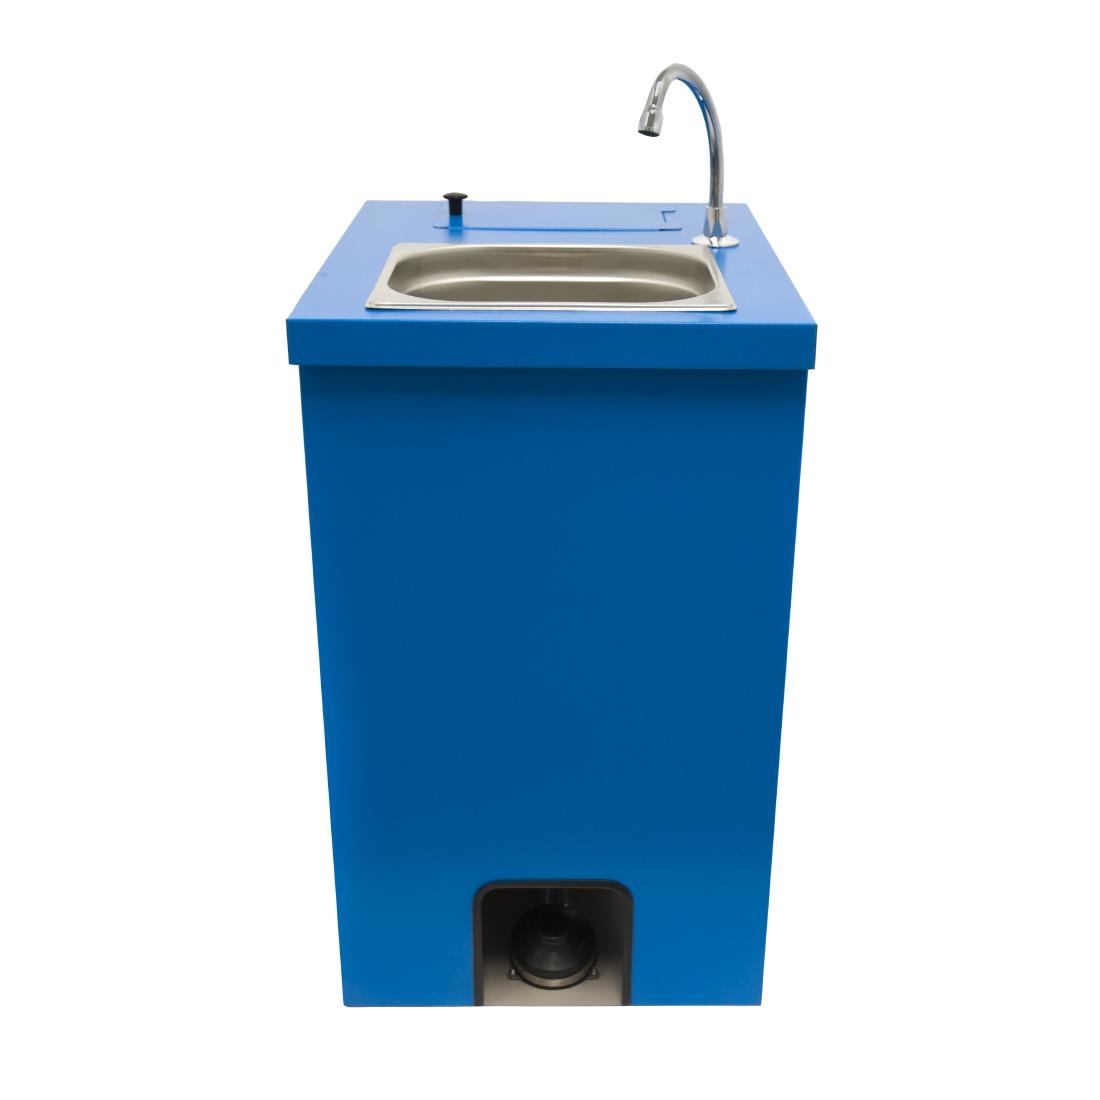 Parry Low Height Heated Hand Wash Basin MWBTL